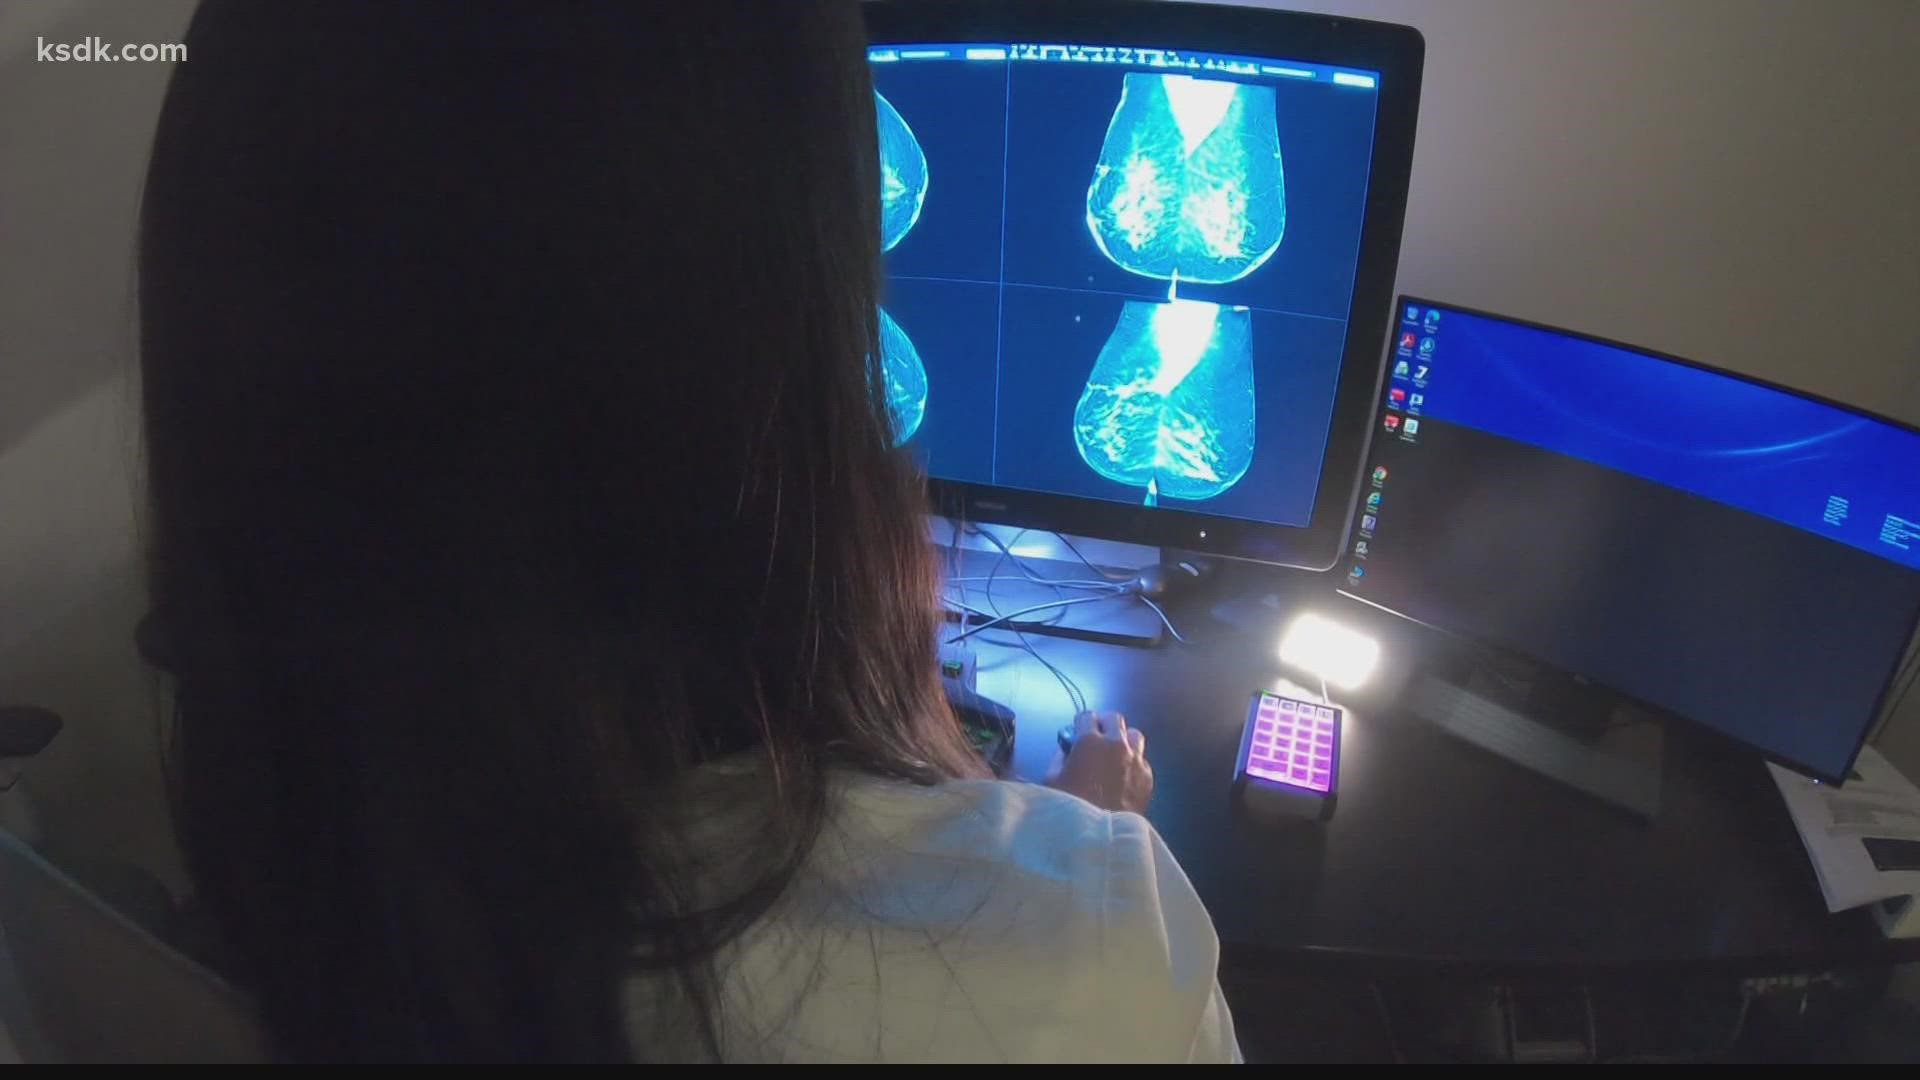 While one local facility received attention for low-quality images in mammograms, experts estimate that 20 percent of breast cancers could be missed at any facility.